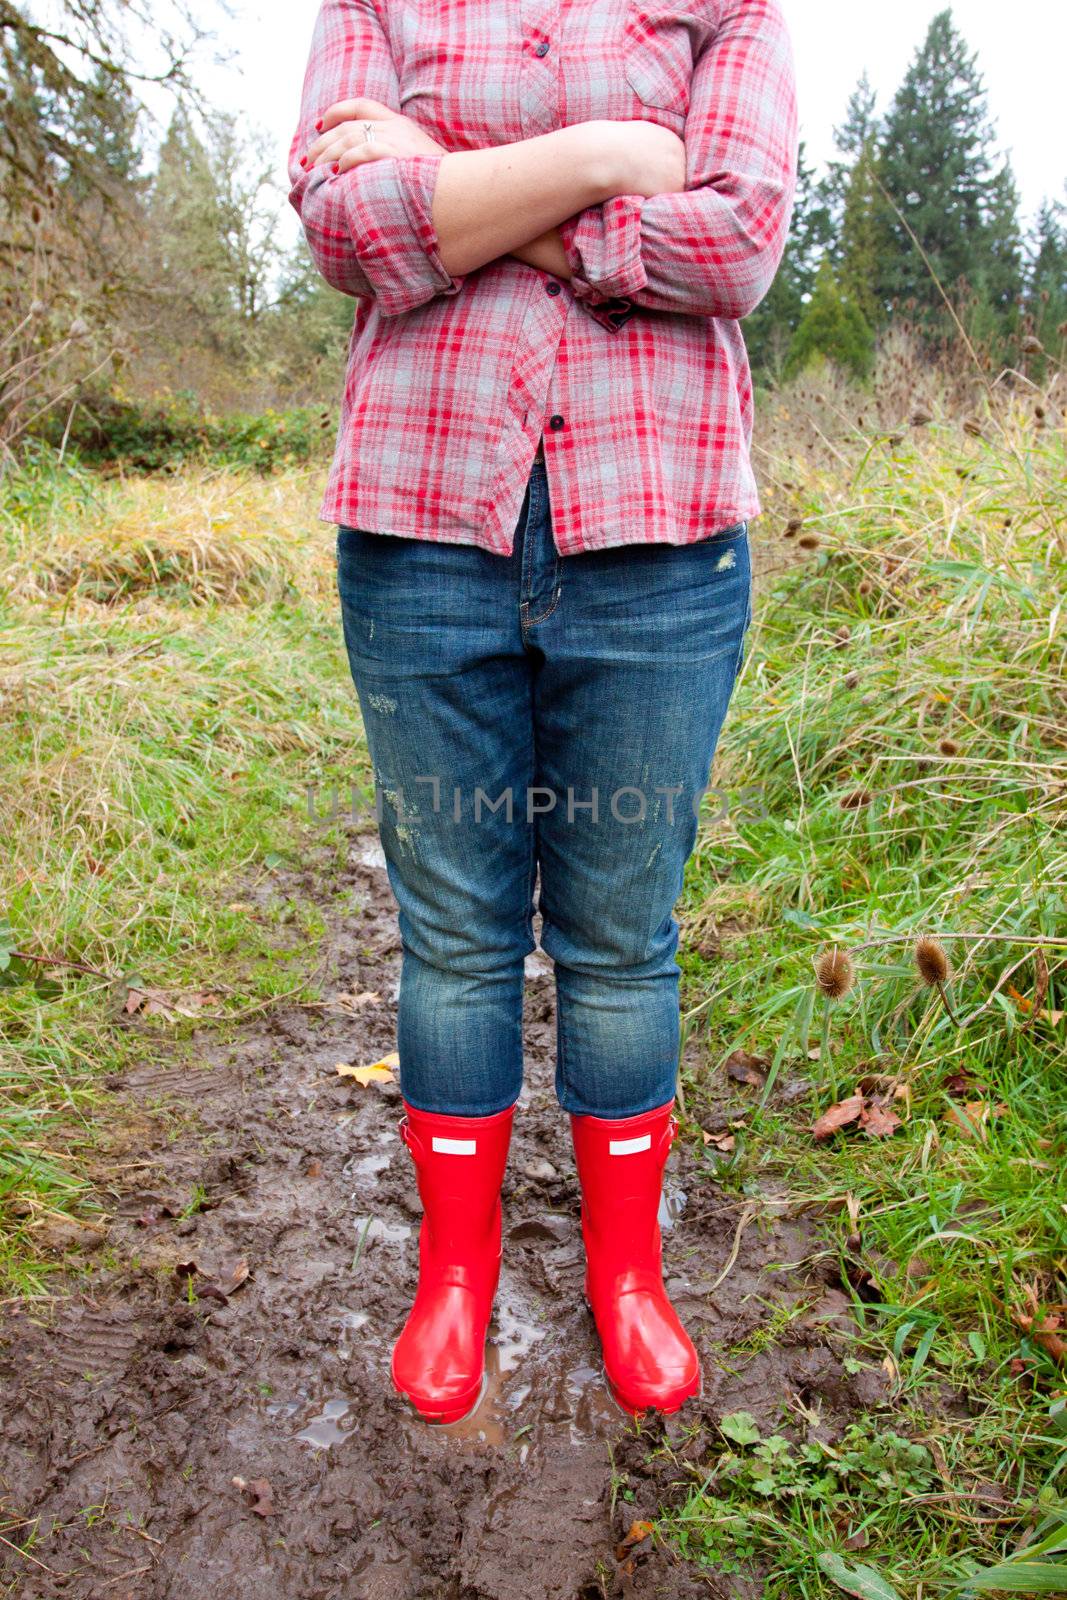 Bright shining clean red rain boots on a girl while she stands in the mud puddle.